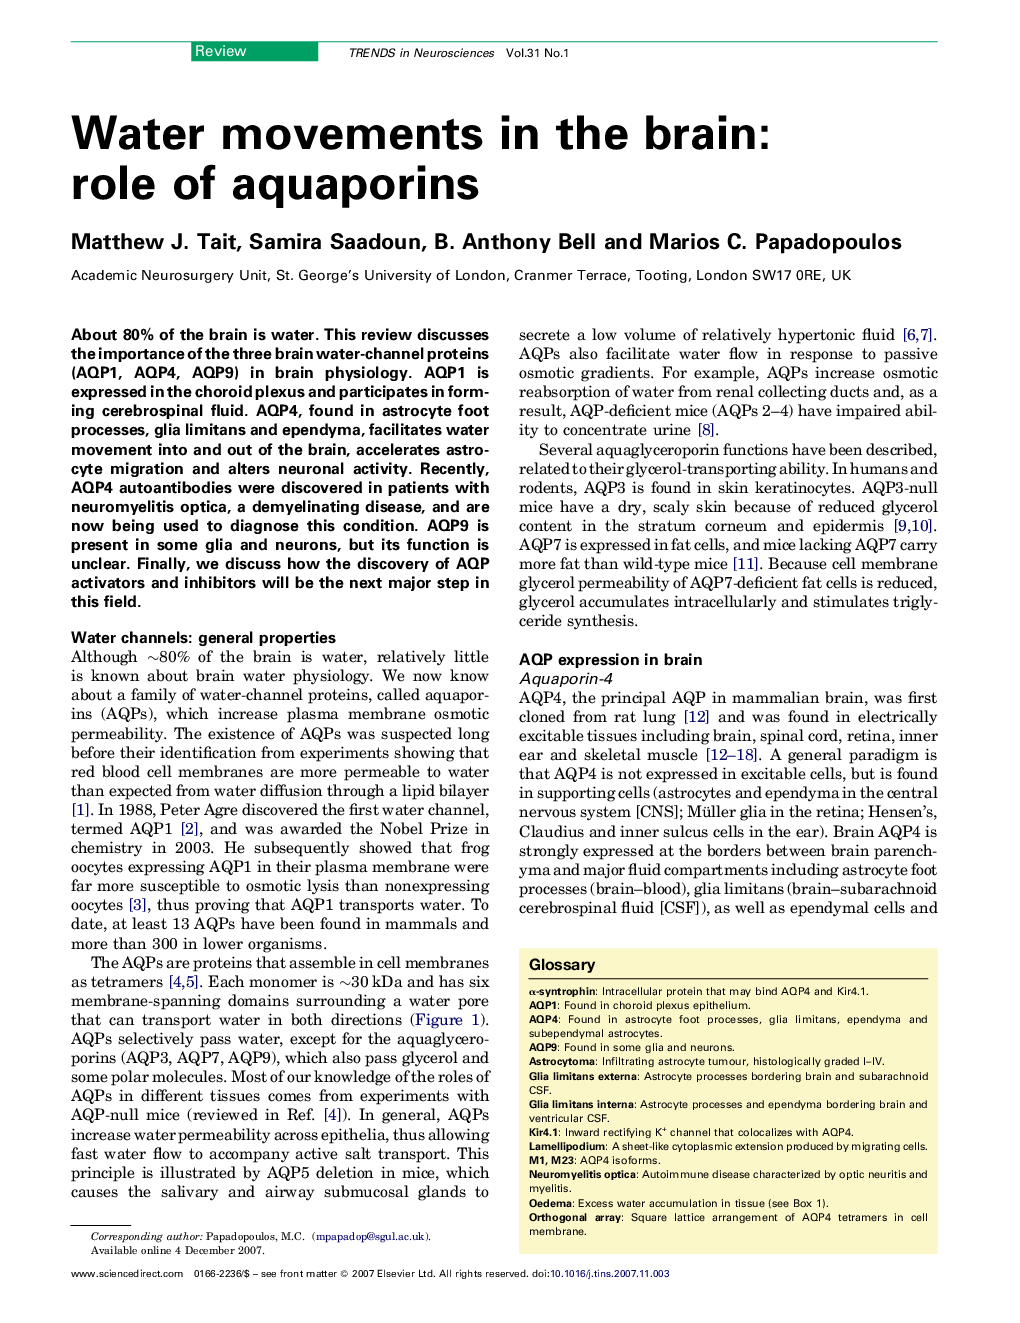 Water movements in the brain: role of aquaporins